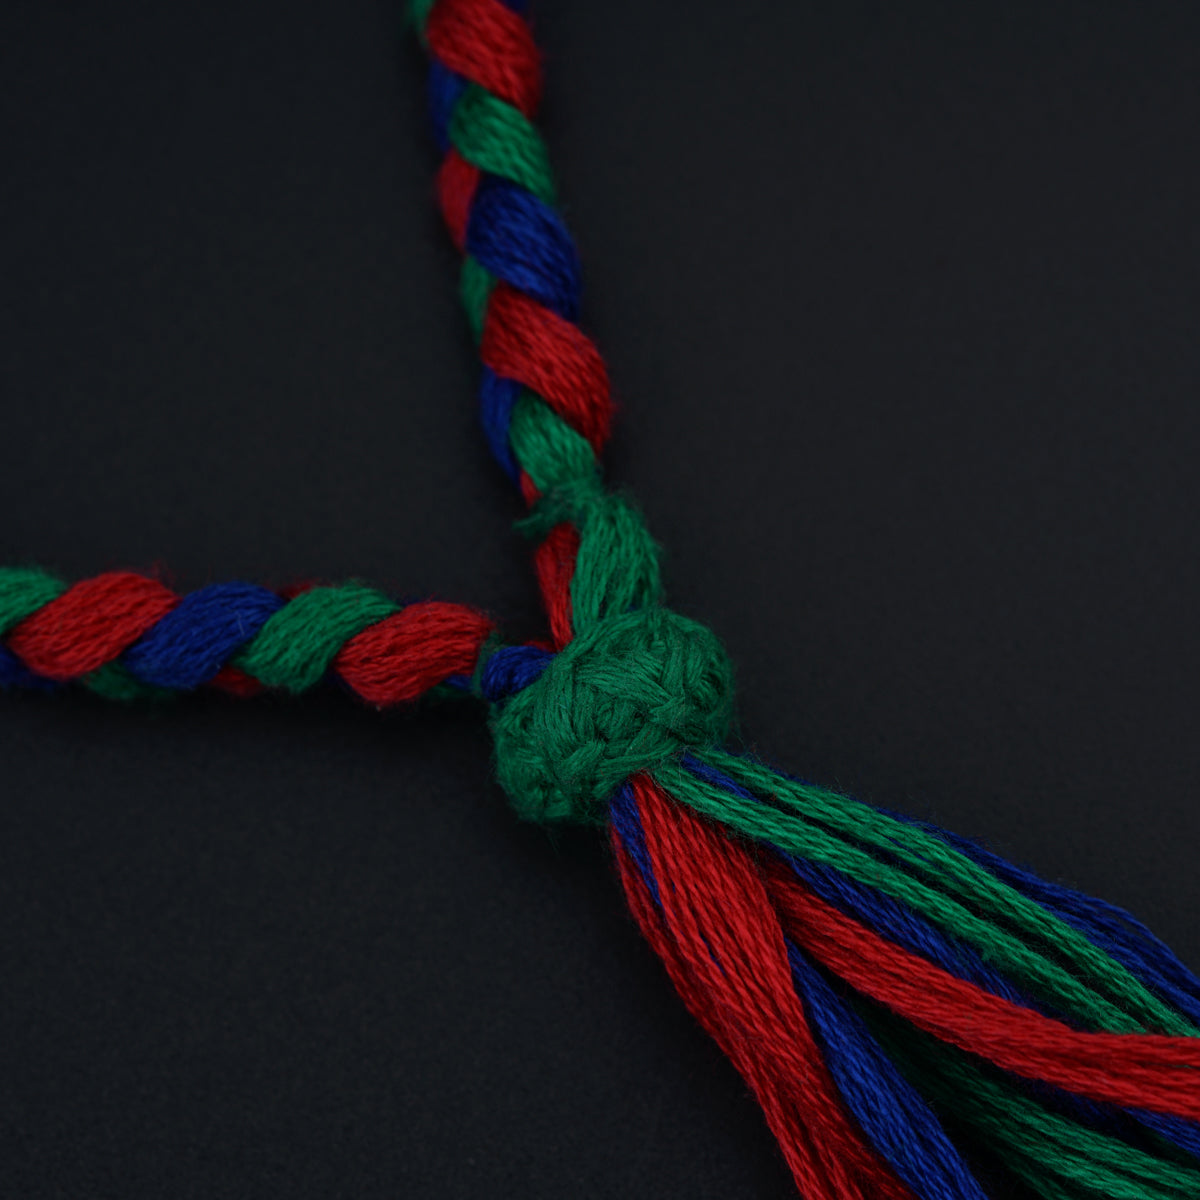 a red, green, and blue rope on a black surface